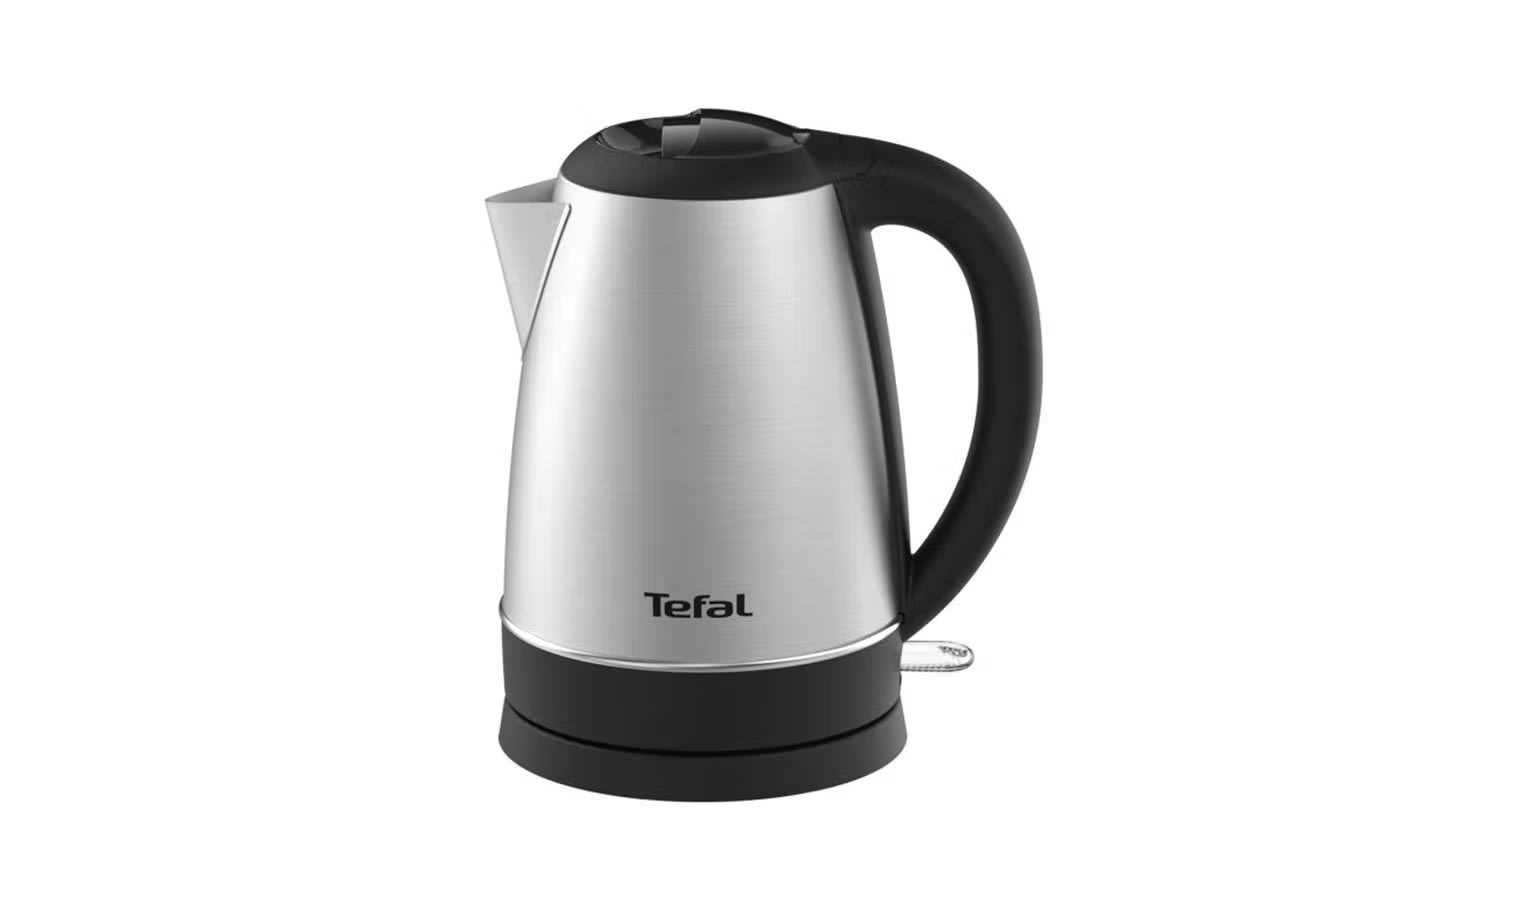 Tefal Handy Stainless Steel Electric Kettle